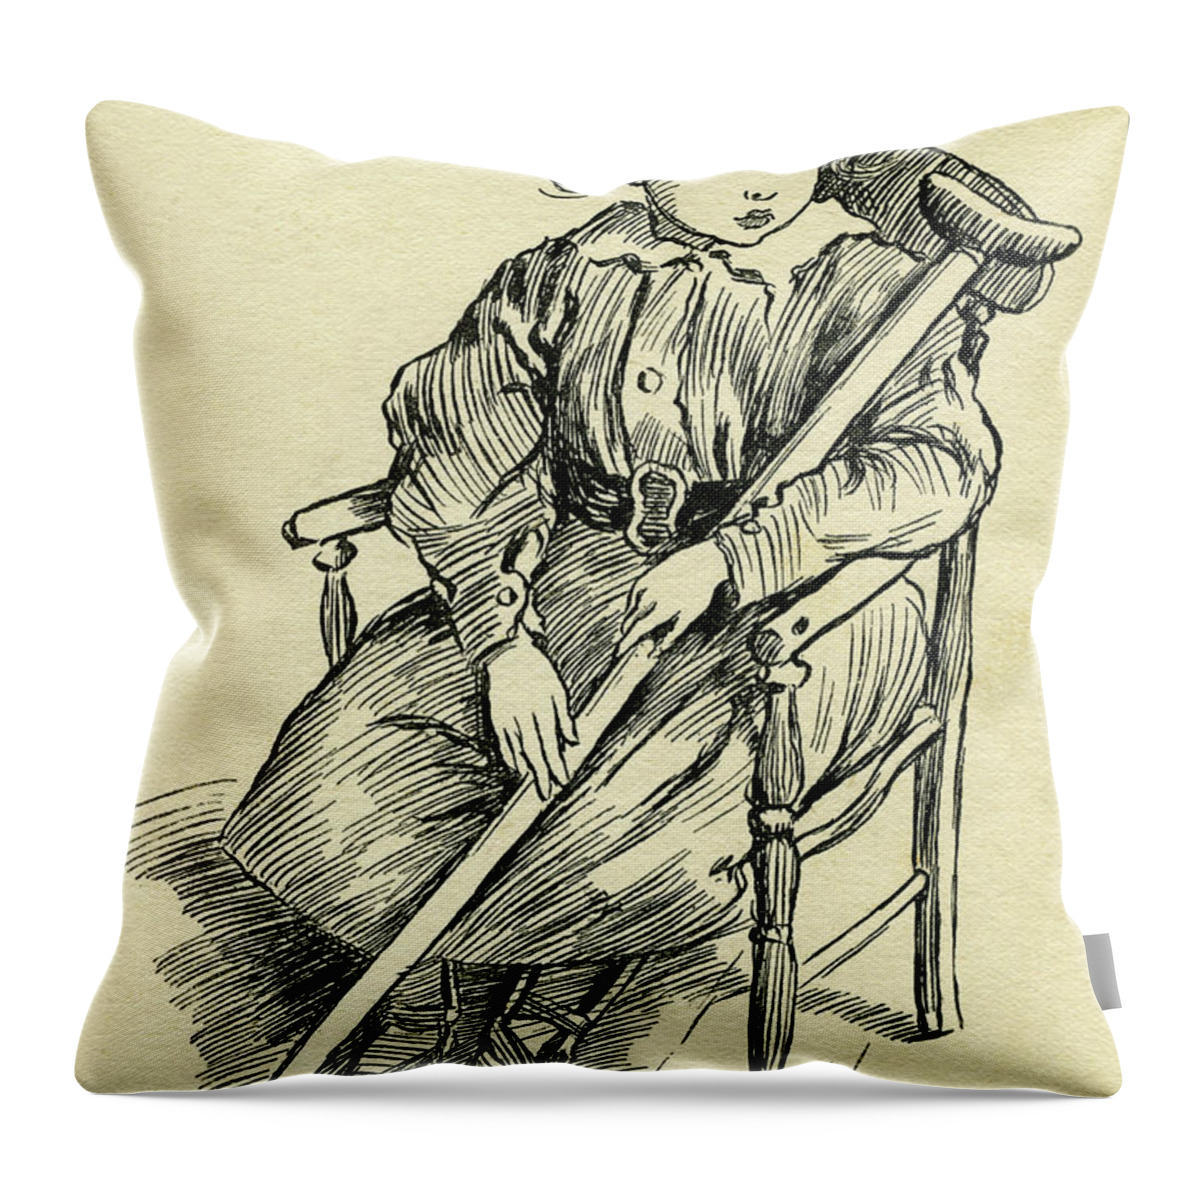 Tiny Throw Pillow featuring the drawing Tiny Tim from A Christmas Carol by Charles Dickens by Harold Copping